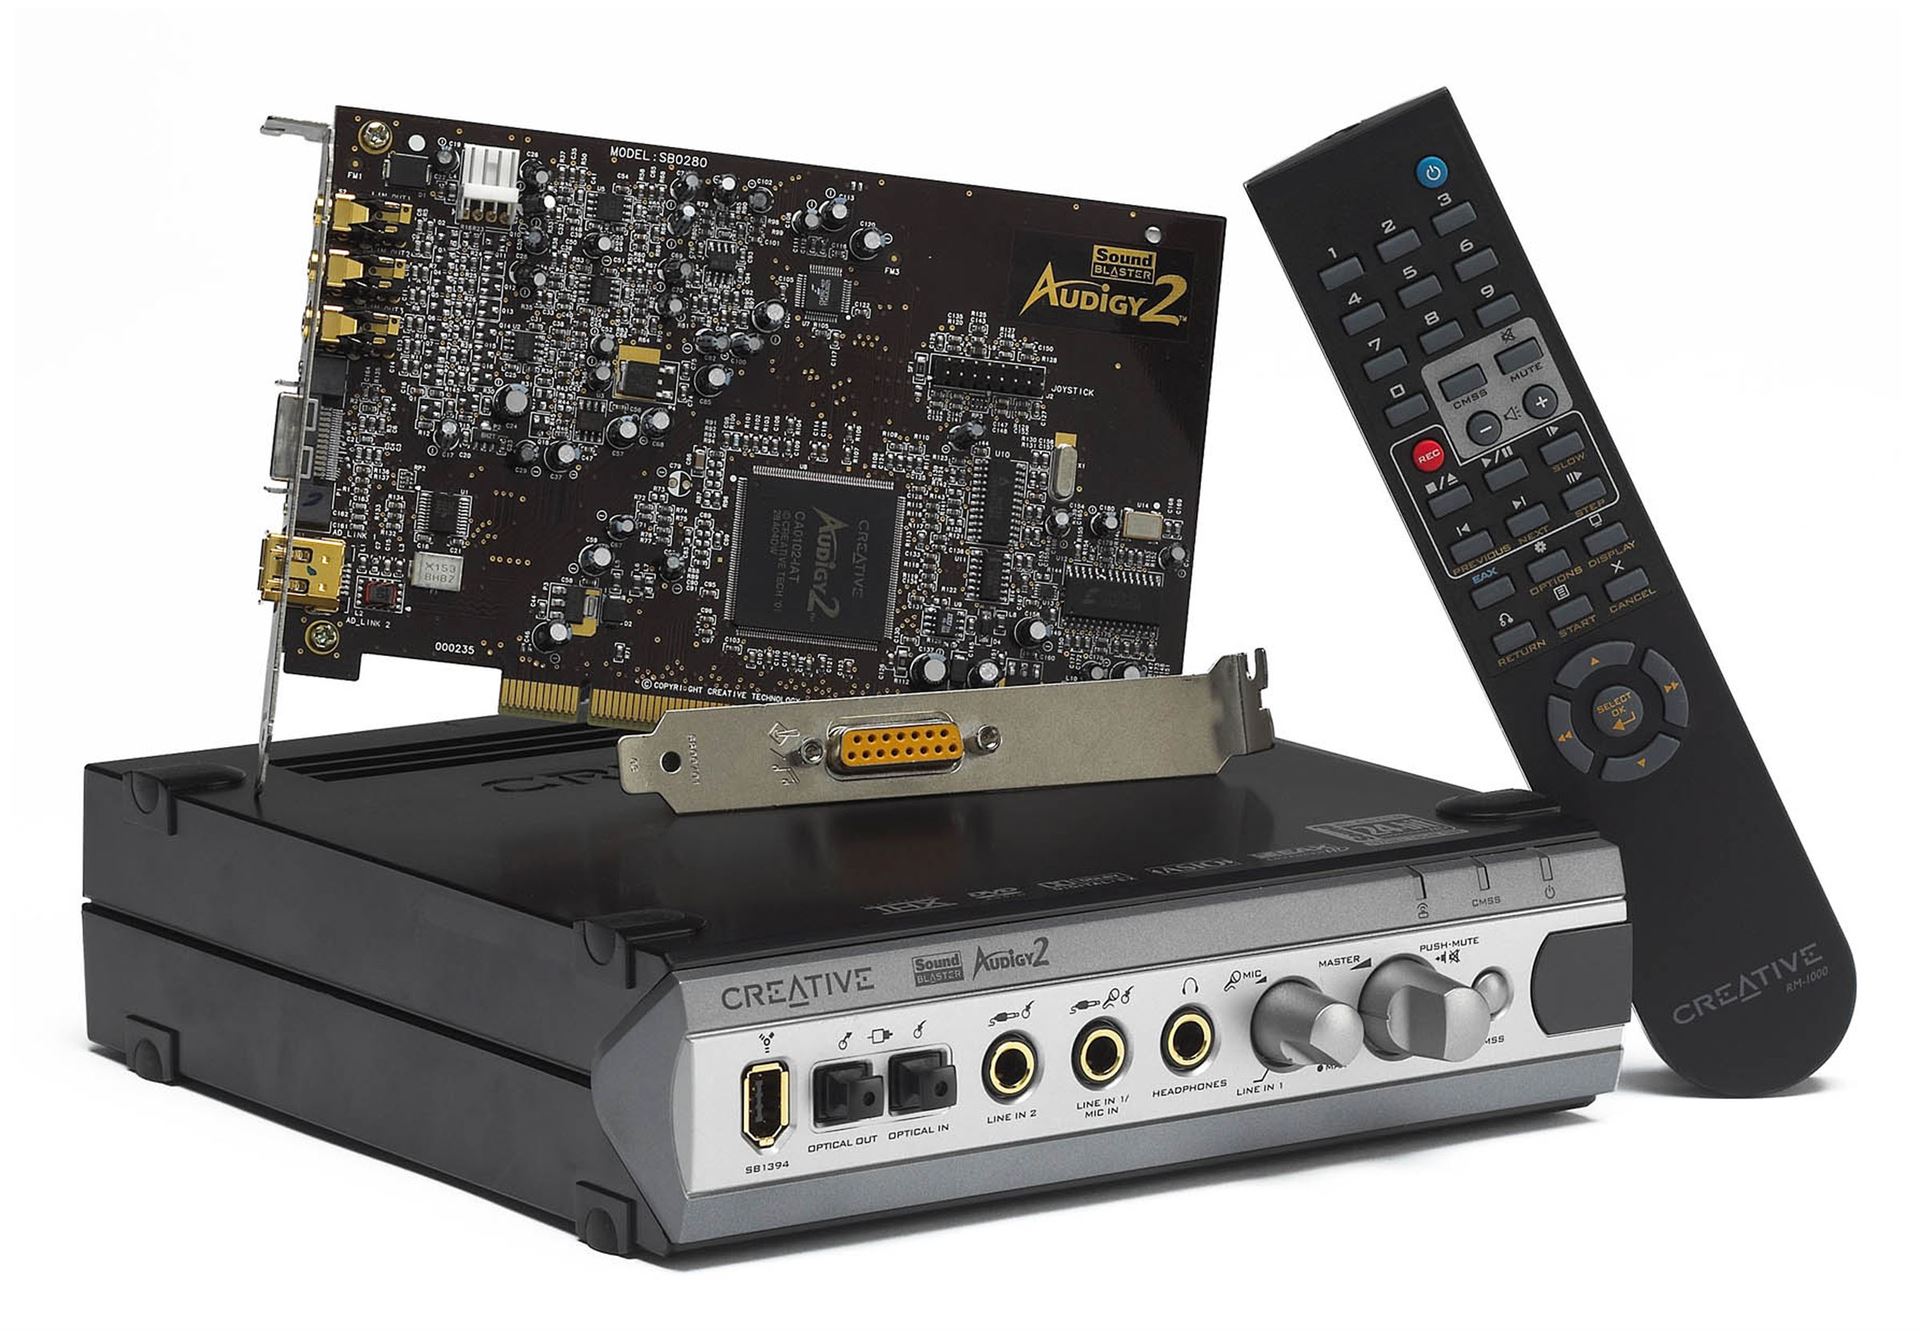 Image of the Audigy 2 ZS Platinum Pro sound card with its external box and remote control.